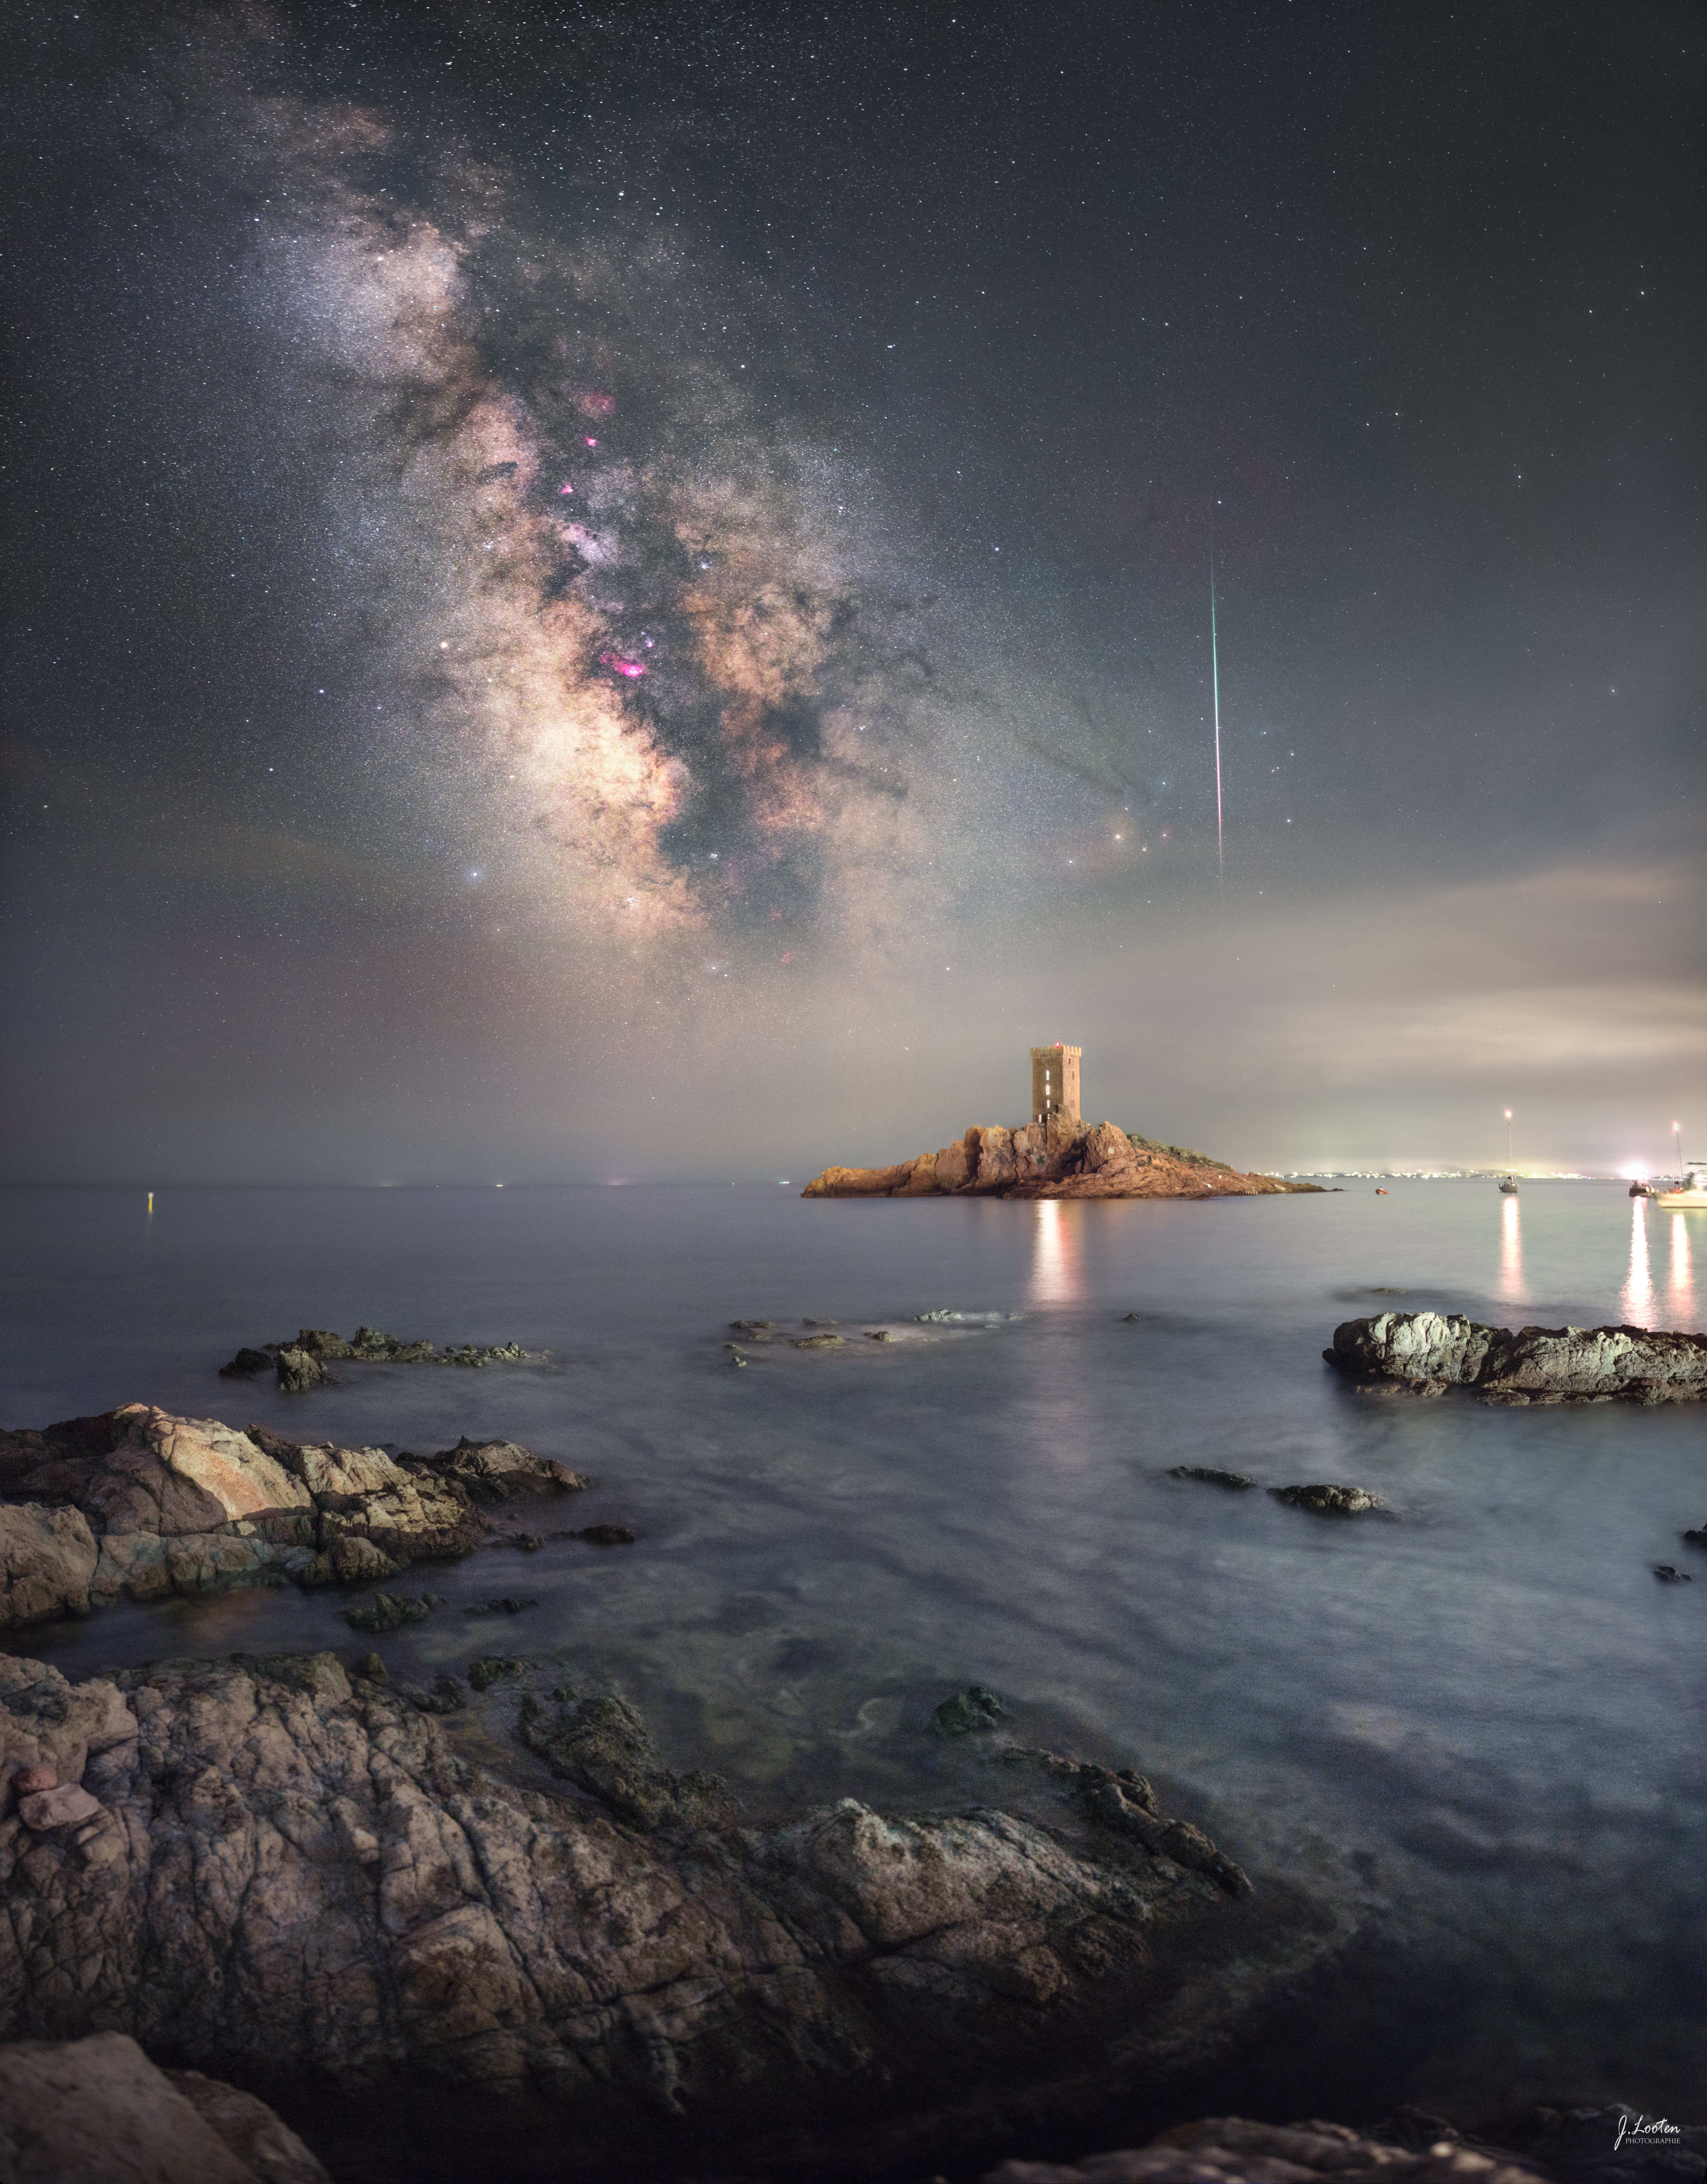 Meteor and Milky Way over the Mediterranean